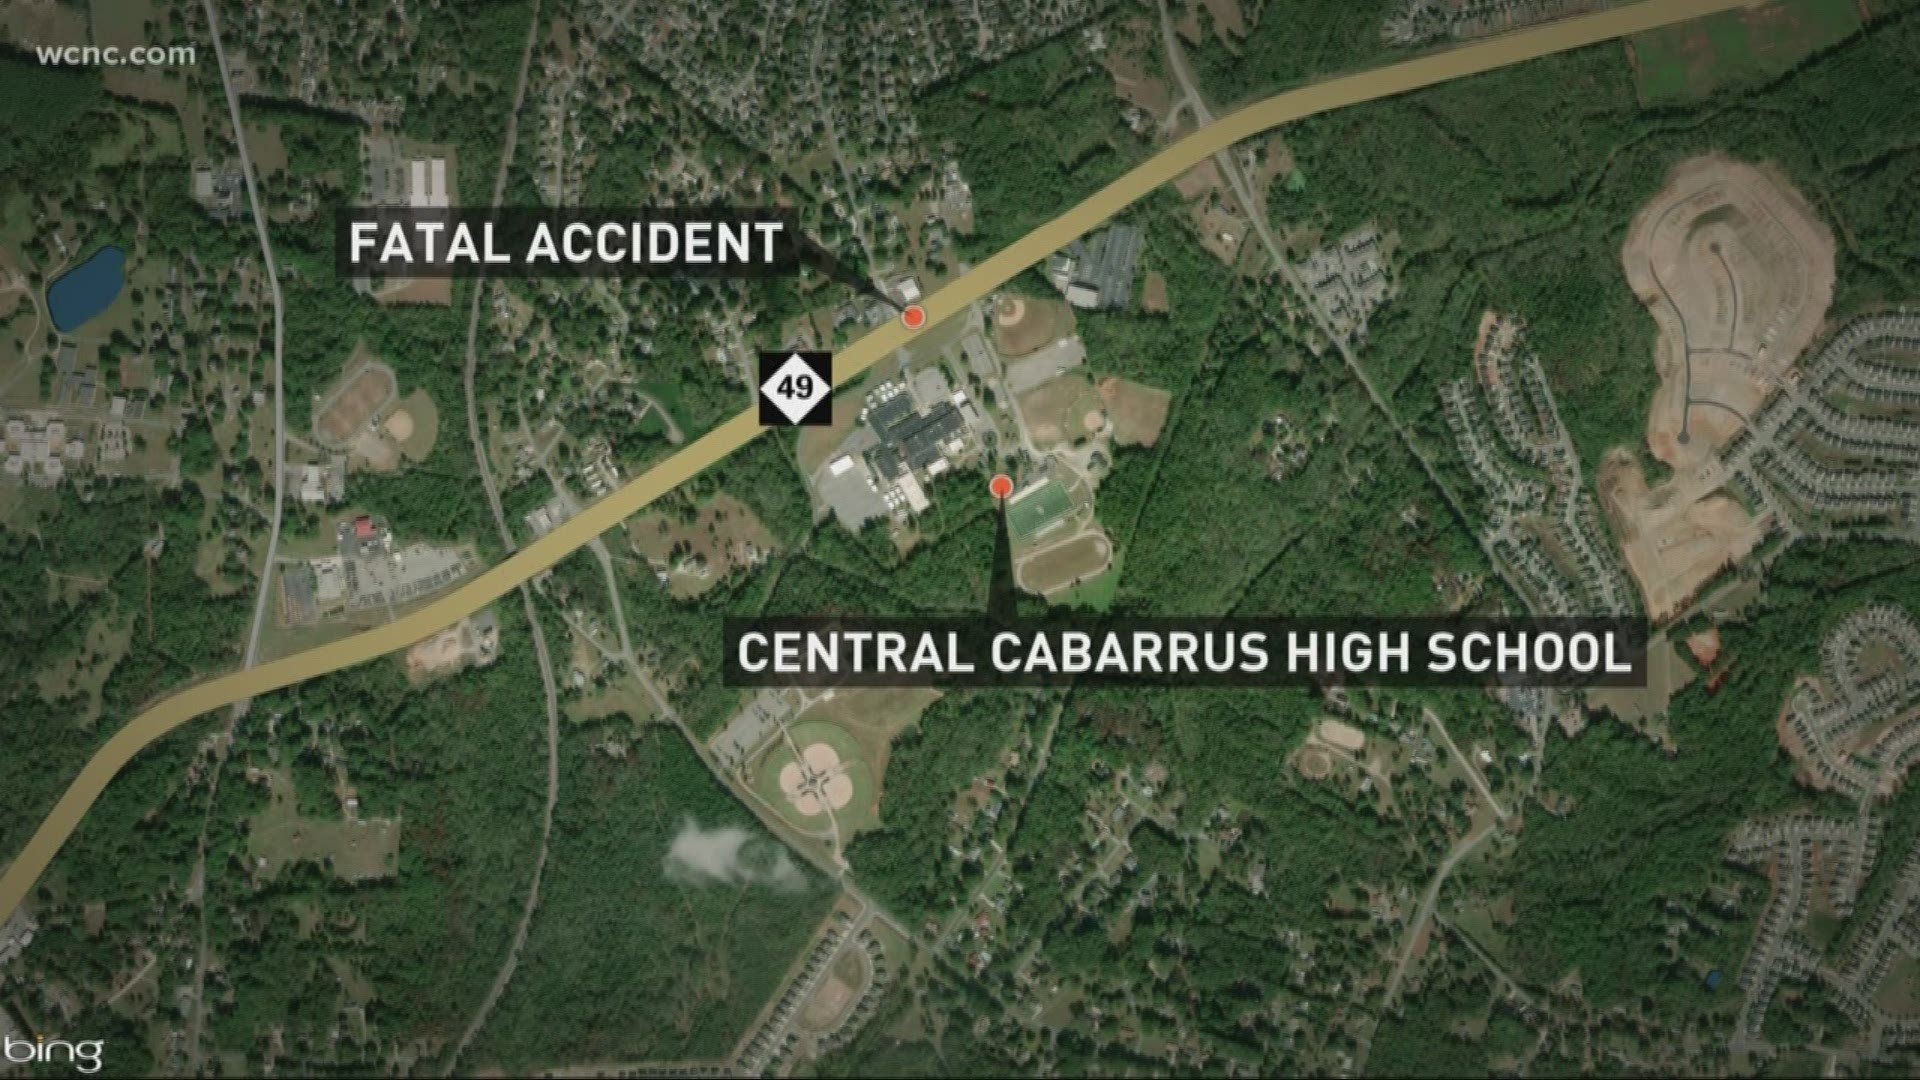 Police say two cars collided near Central Cabarrus High School. One driver was killed, the other taken to the hospital.